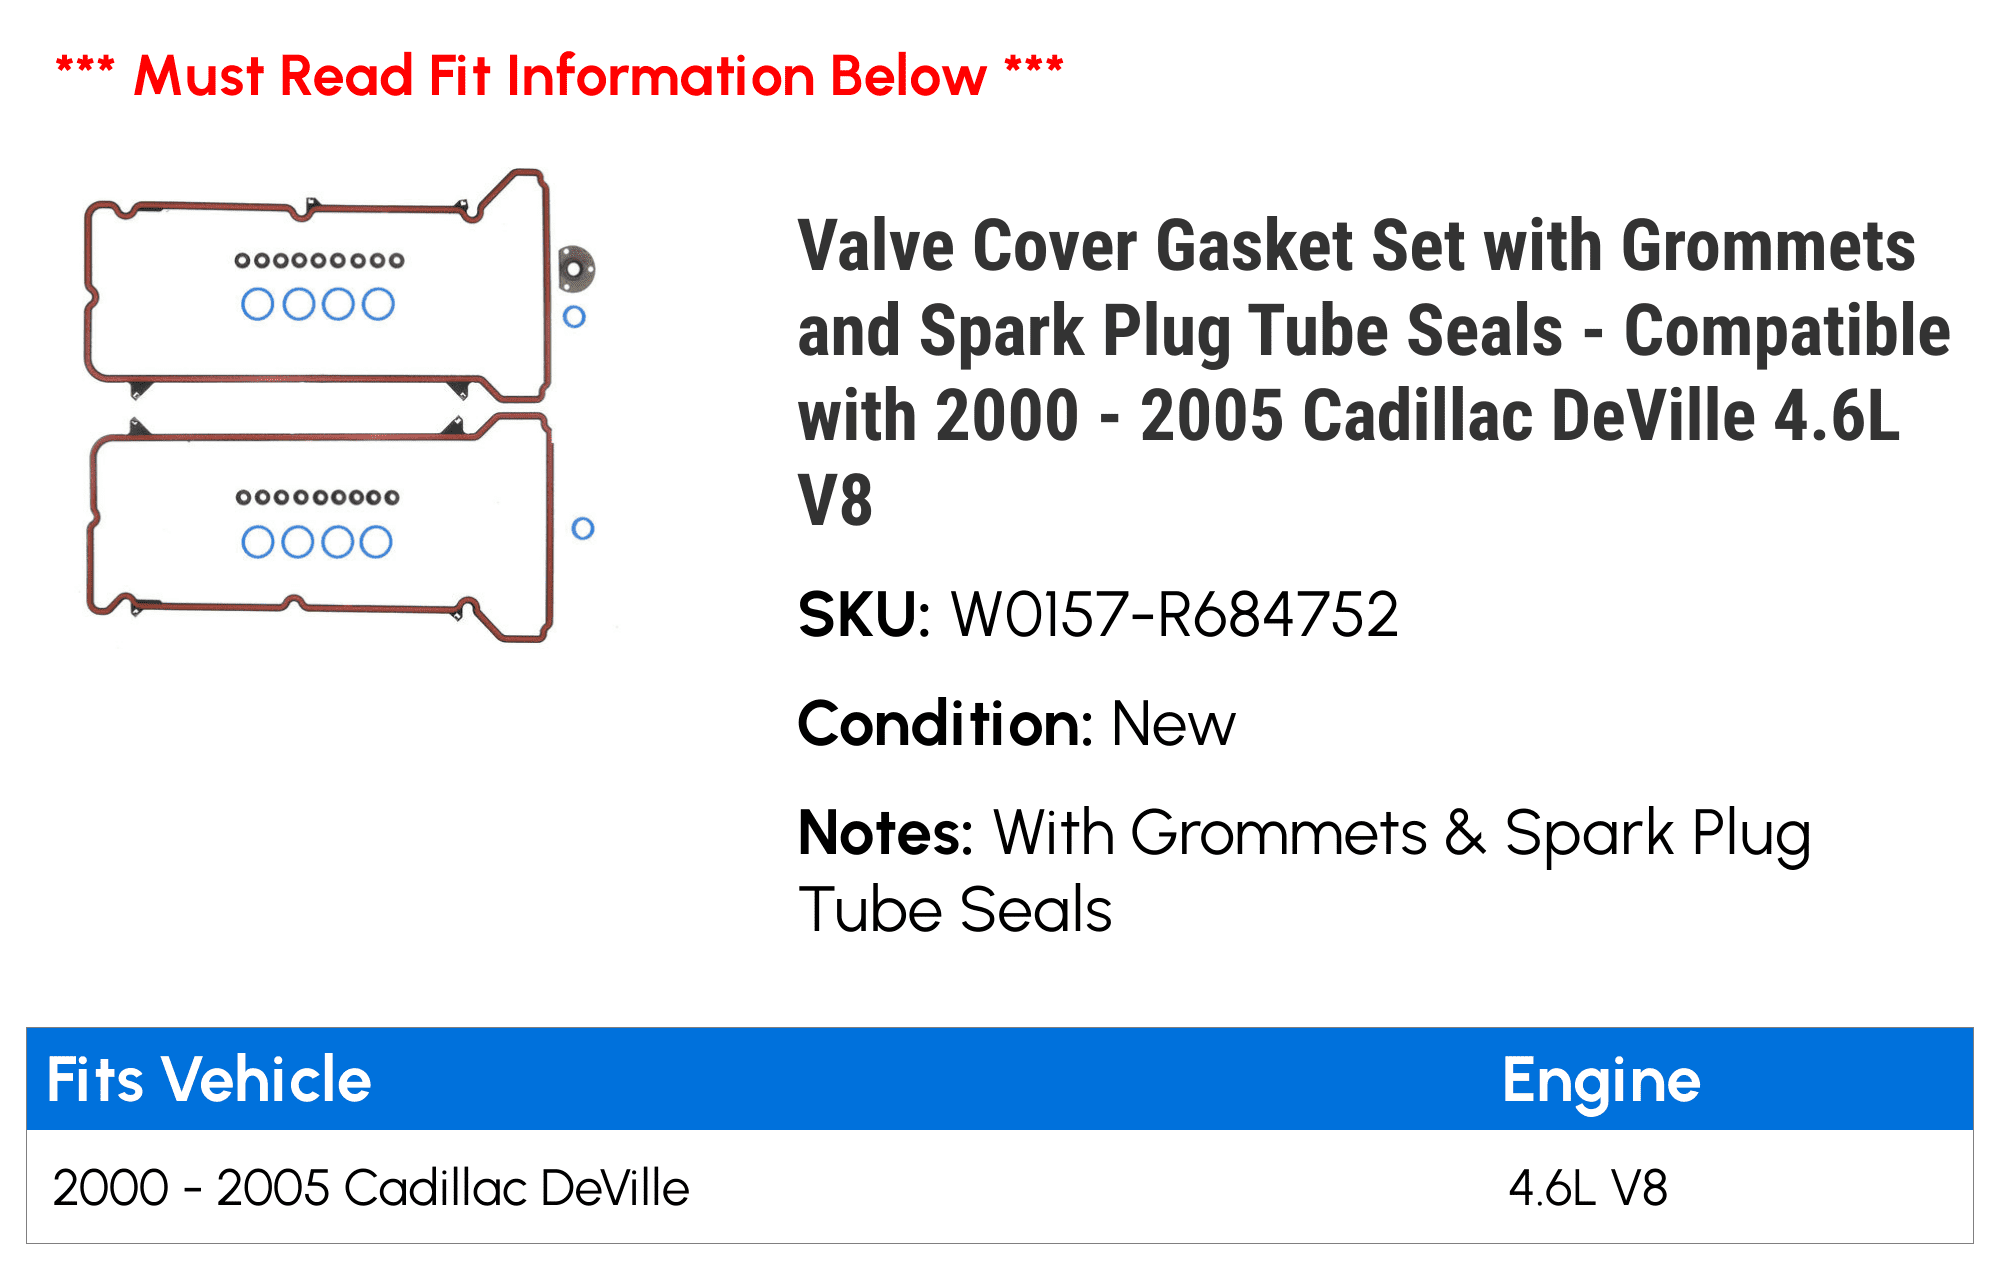 Valve Cover Gasket Set with Grommets and Spark Plug Tube Seals Compatible  with 2000 2005 Cadillac DeVille 4.6L V8 2001 2002 2003 2004